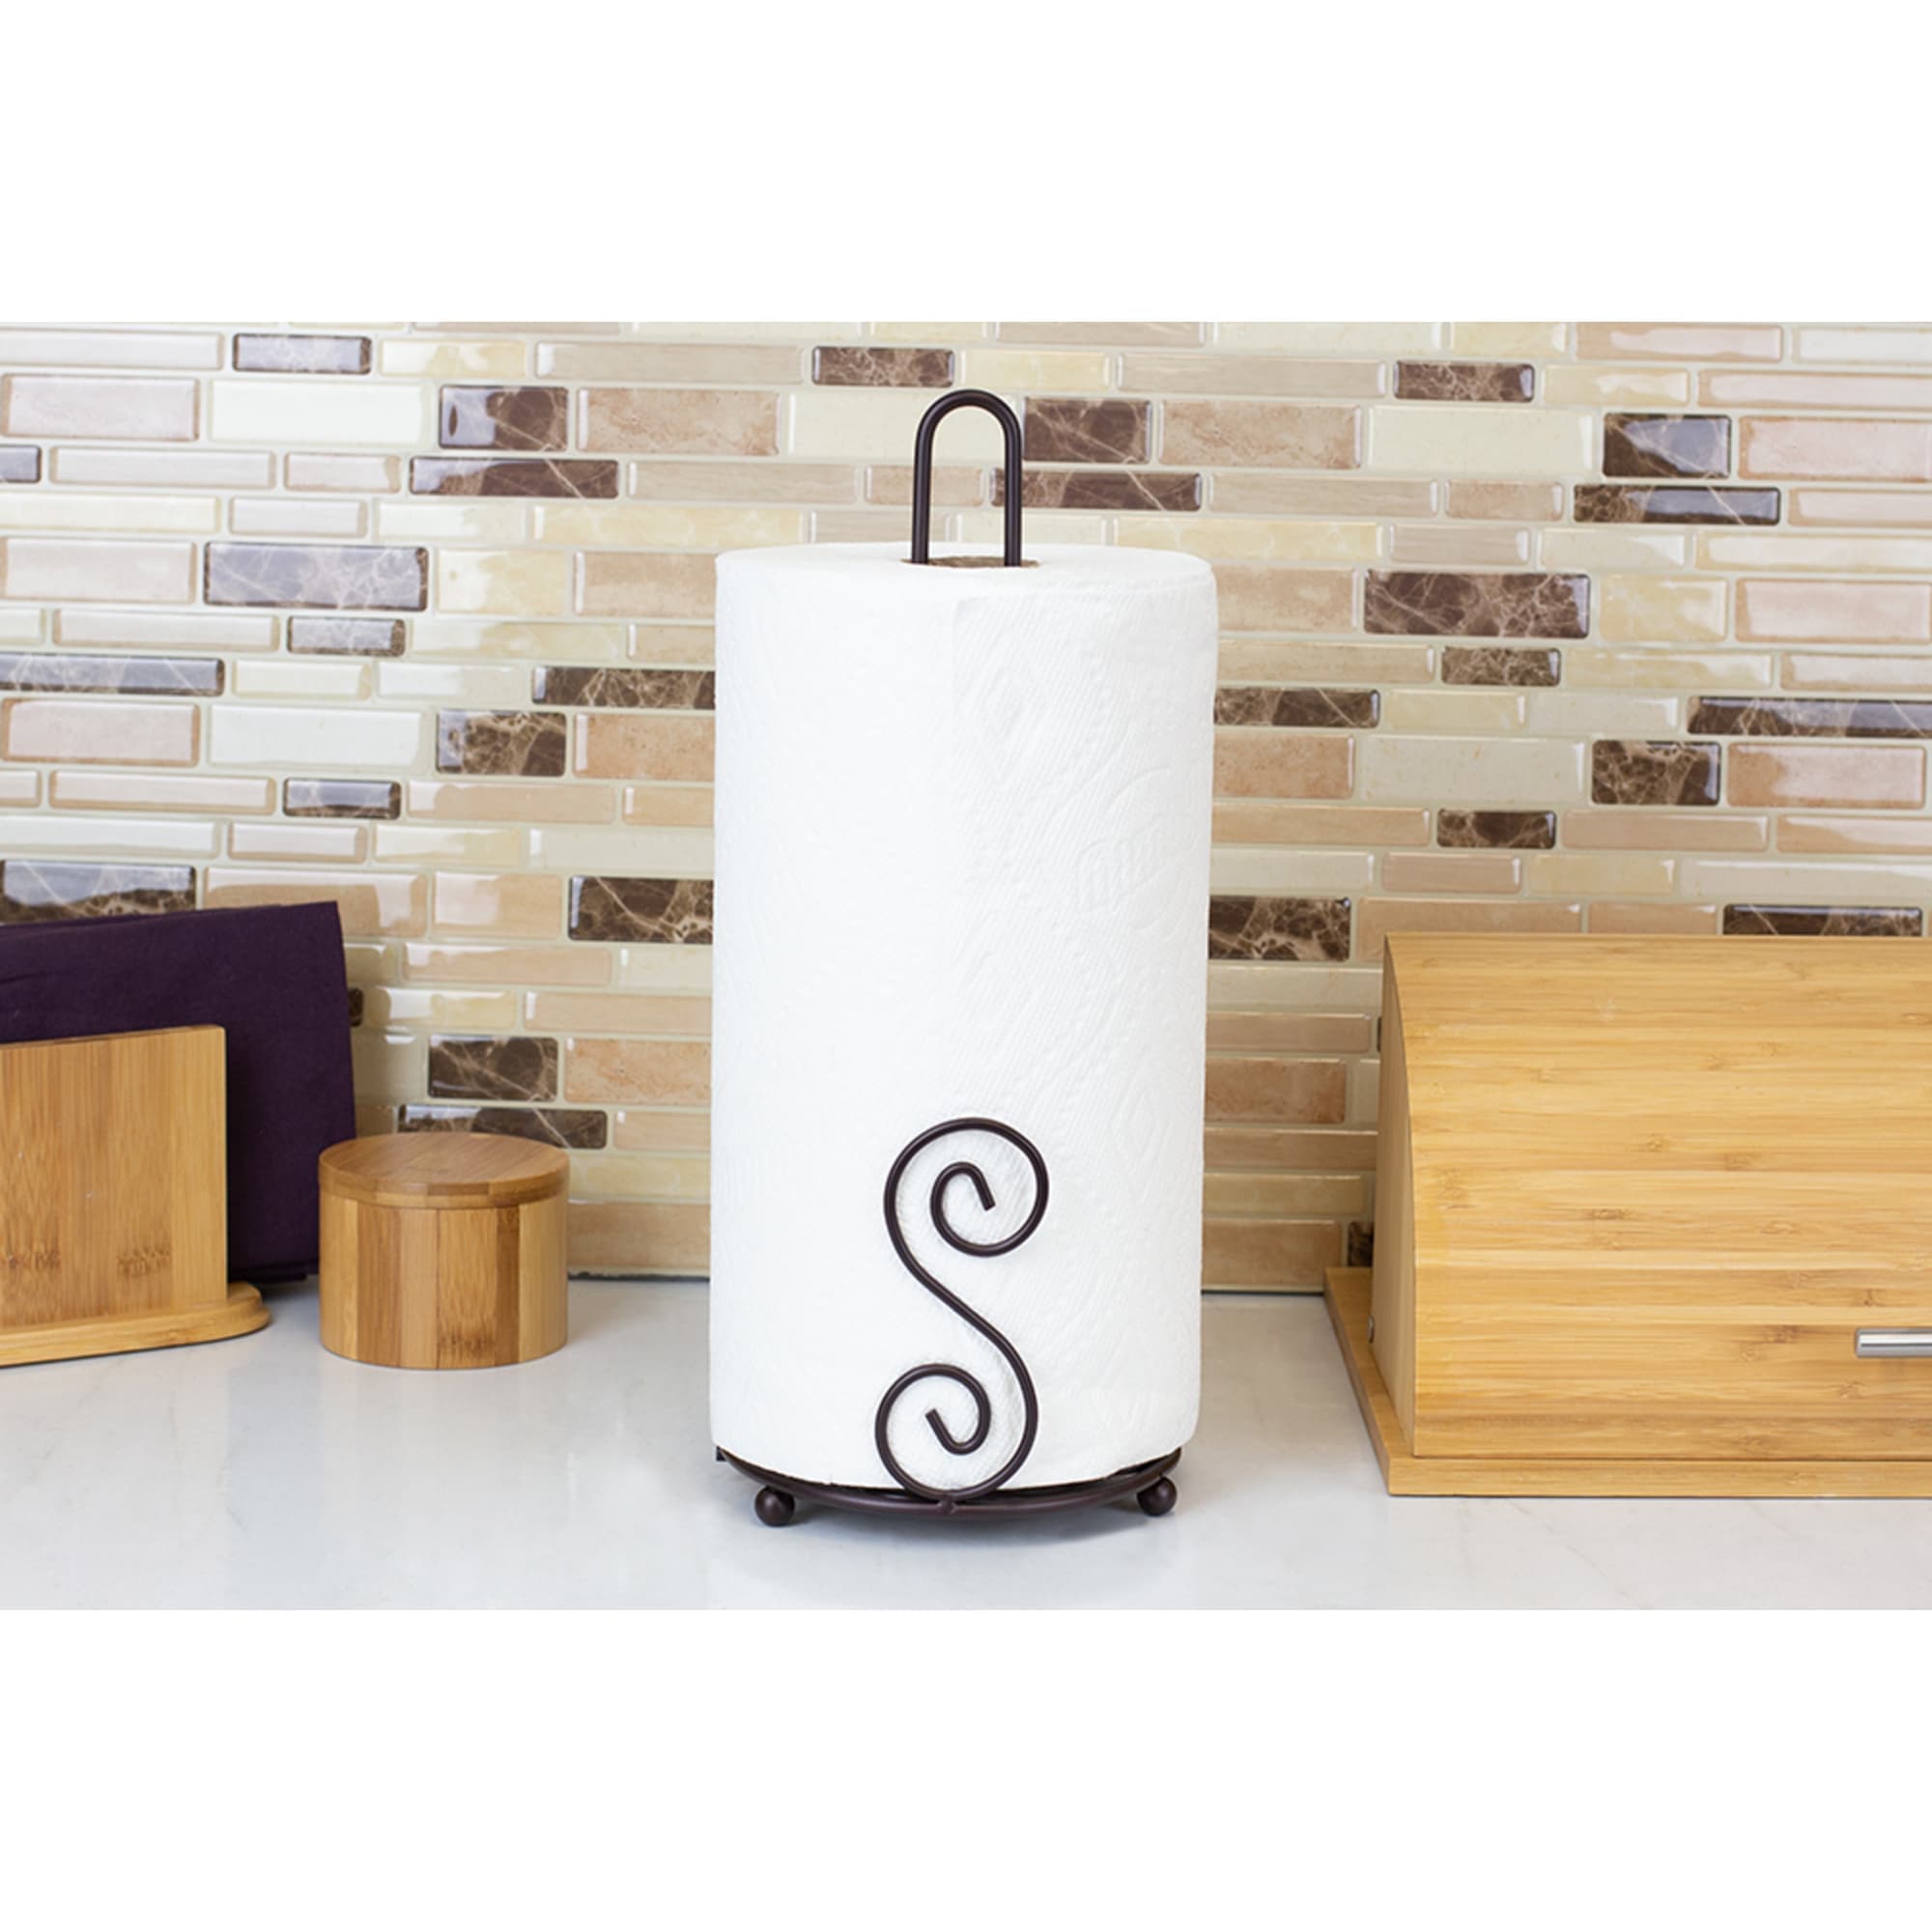 Home Basics Scroll Collection Steel Paper Towel Holder, Bronze $5.00 EACH, CASE PACK OF 12